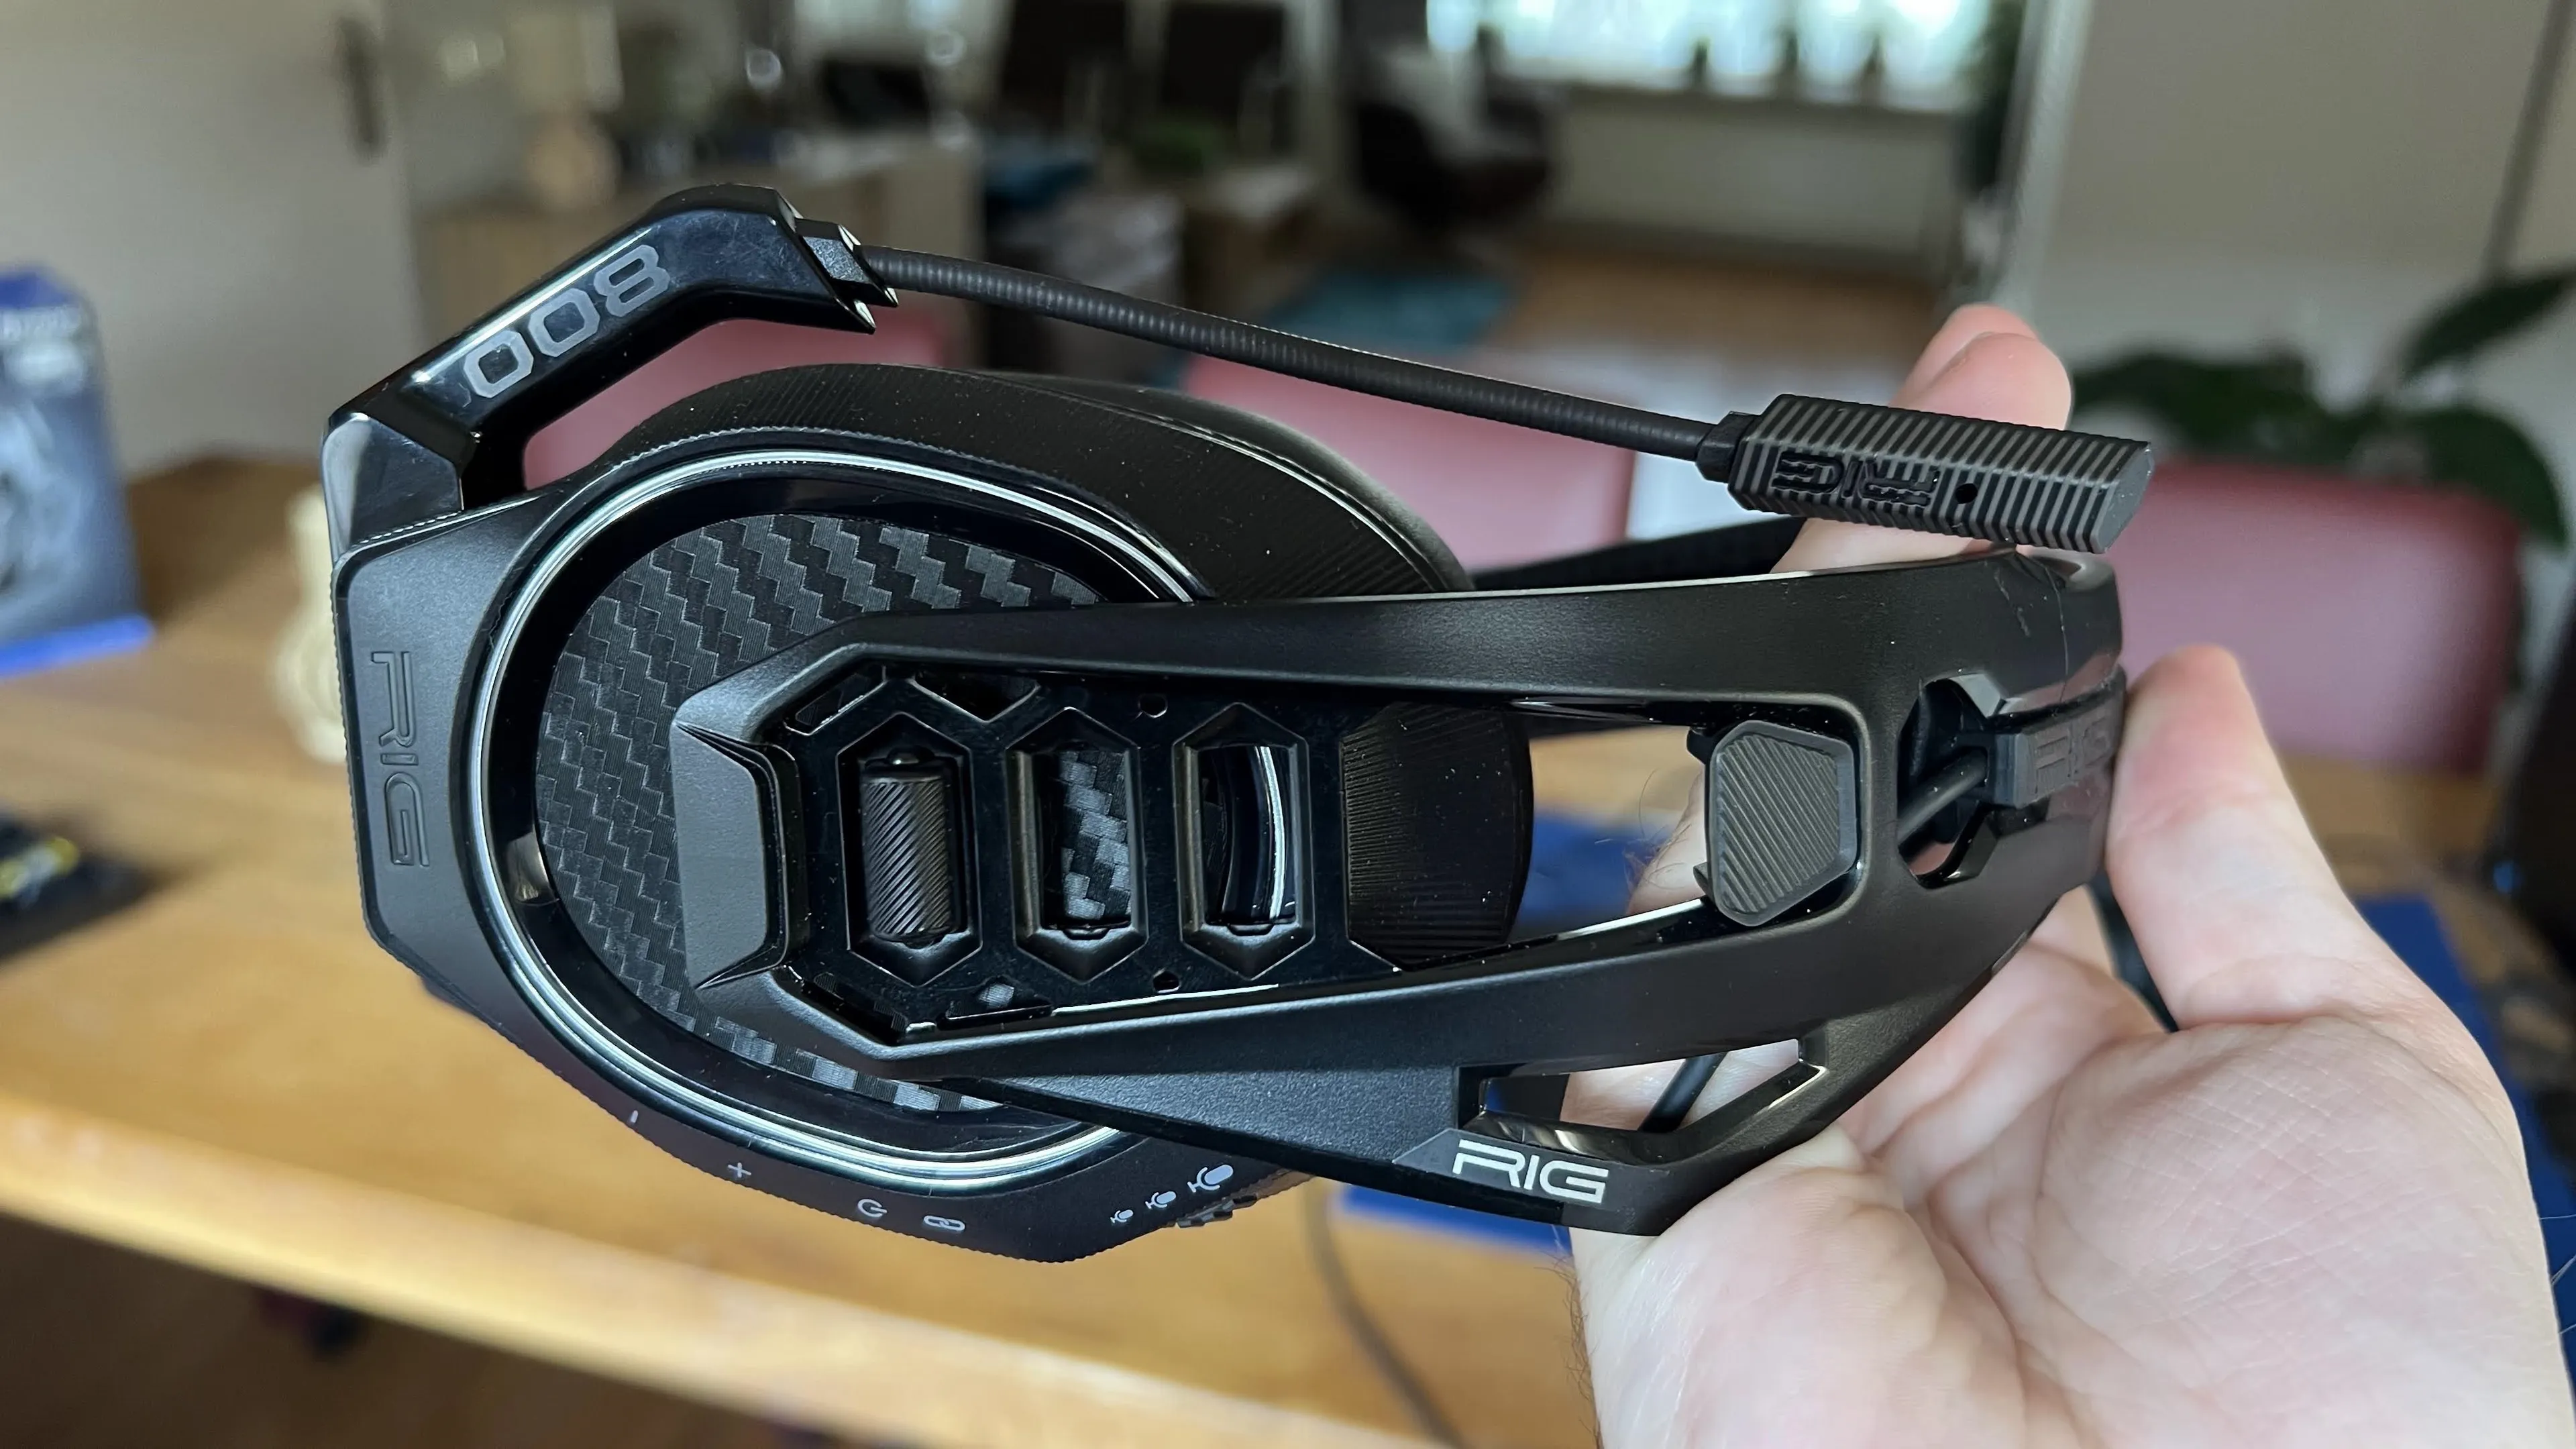 rig 800 pro hs headset review 4f1664550442